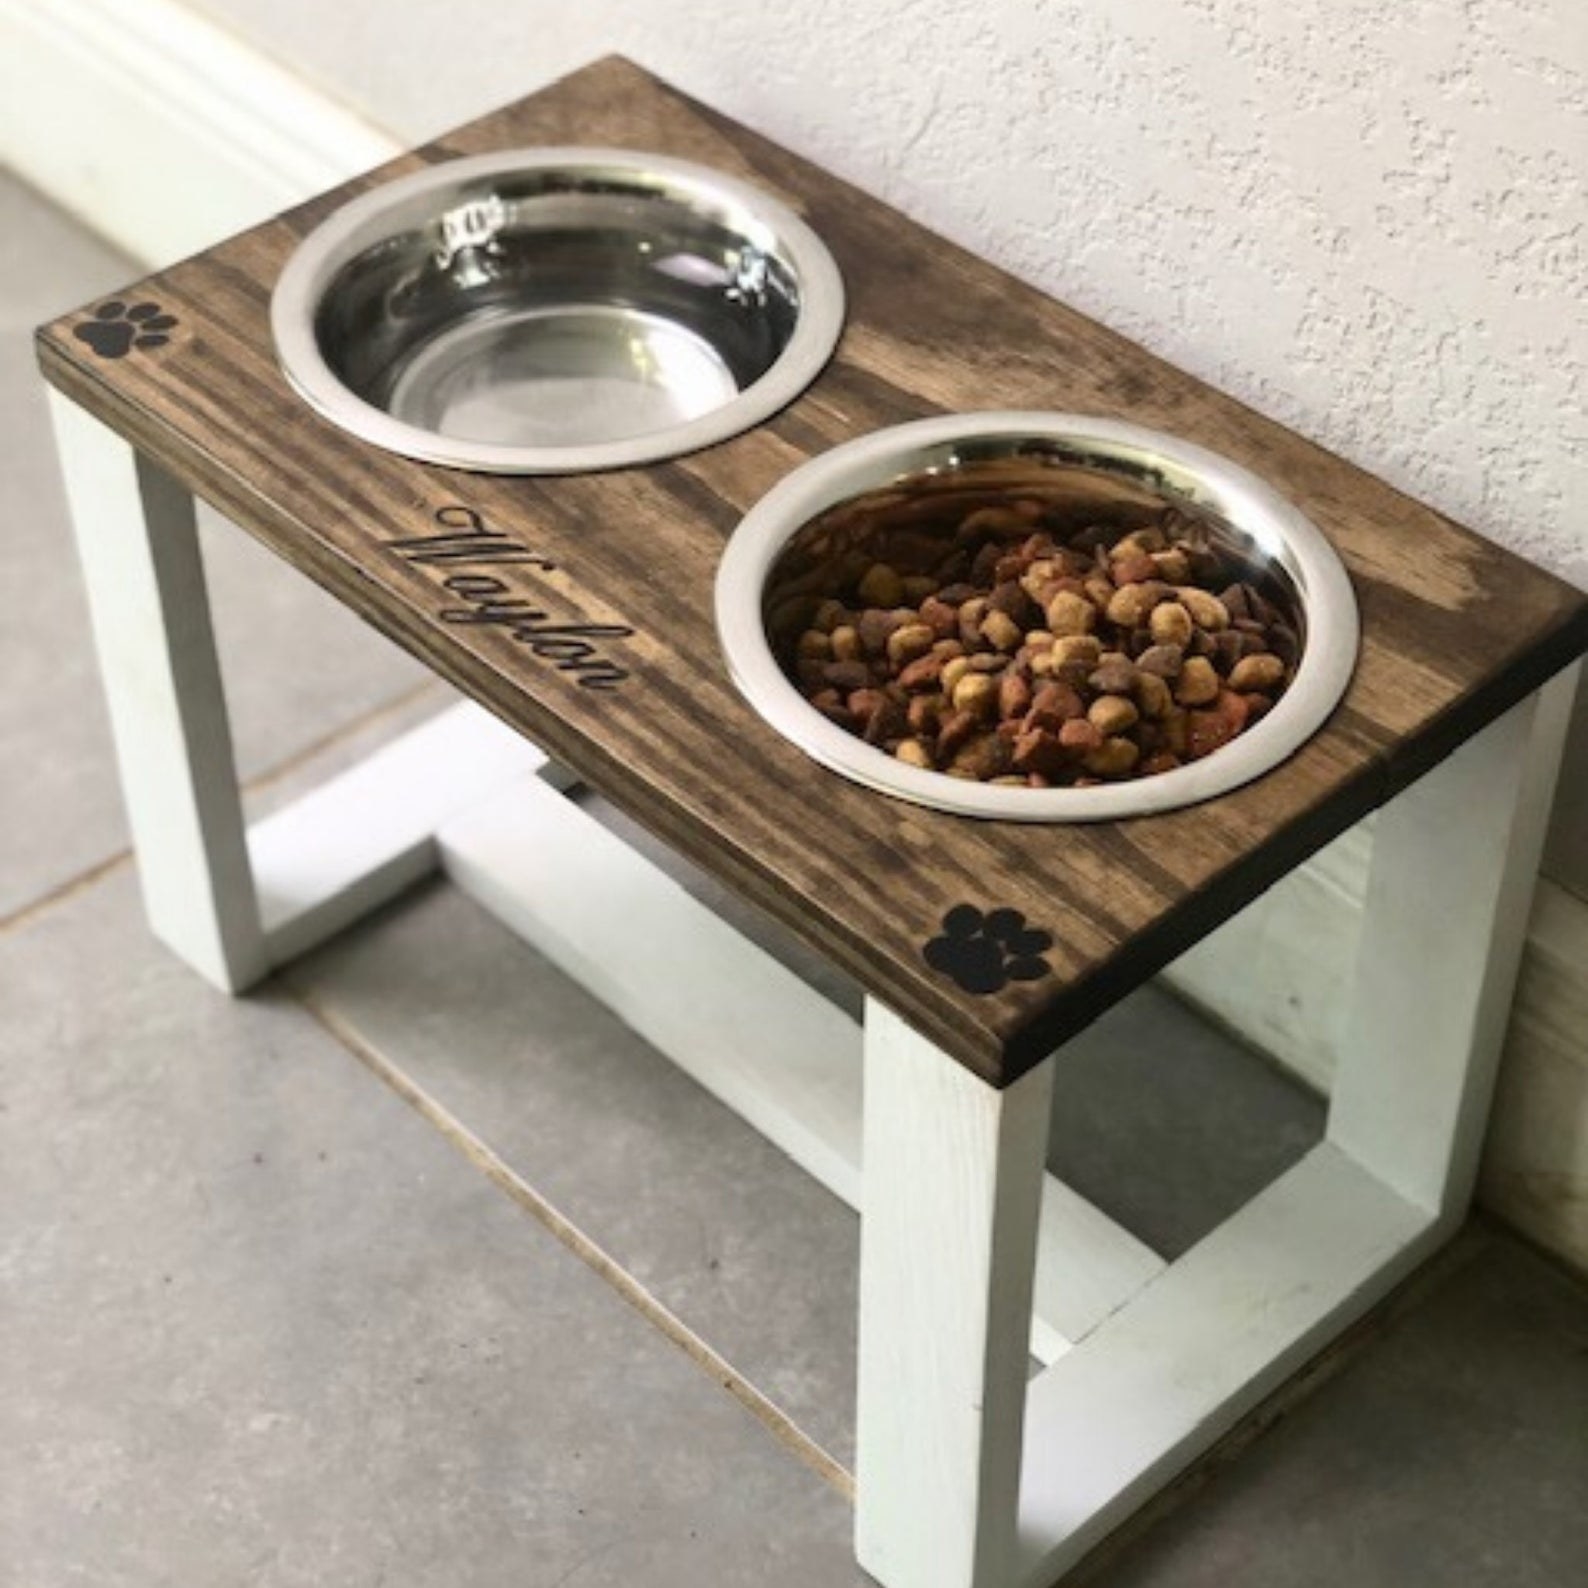 Two dog bowls lodged inside a wooden feeding station with legs for easy access